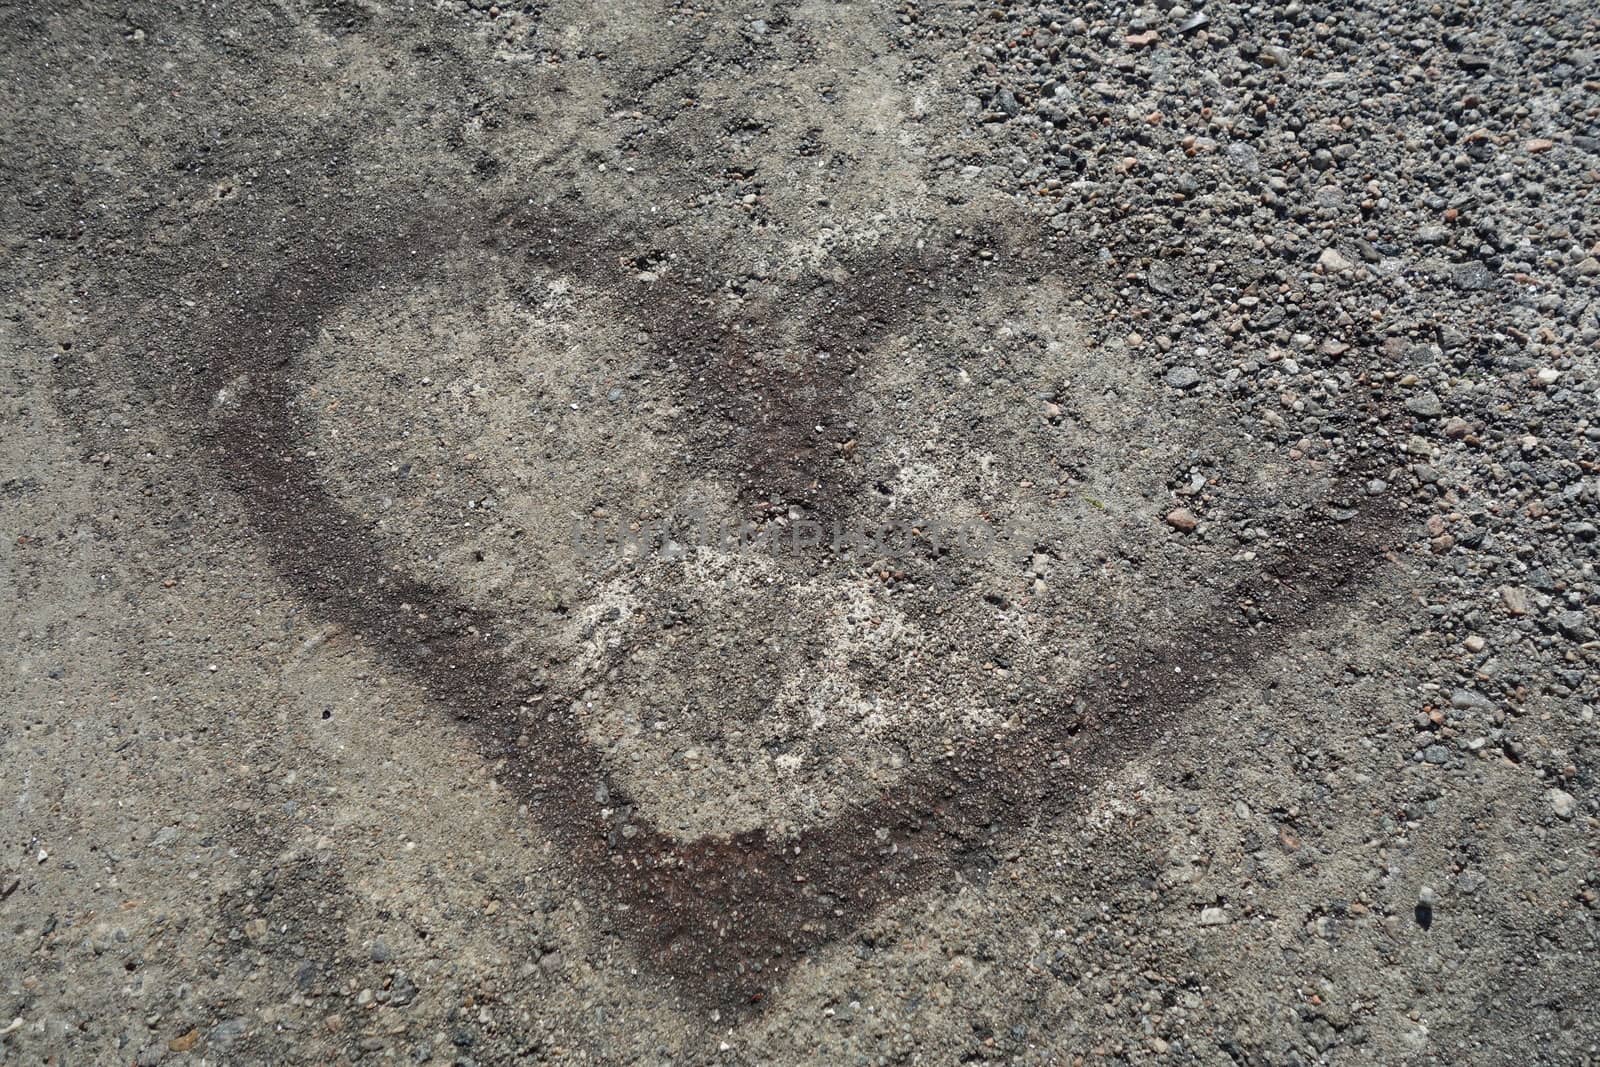 Heart mark in cement seen at a public swimming area